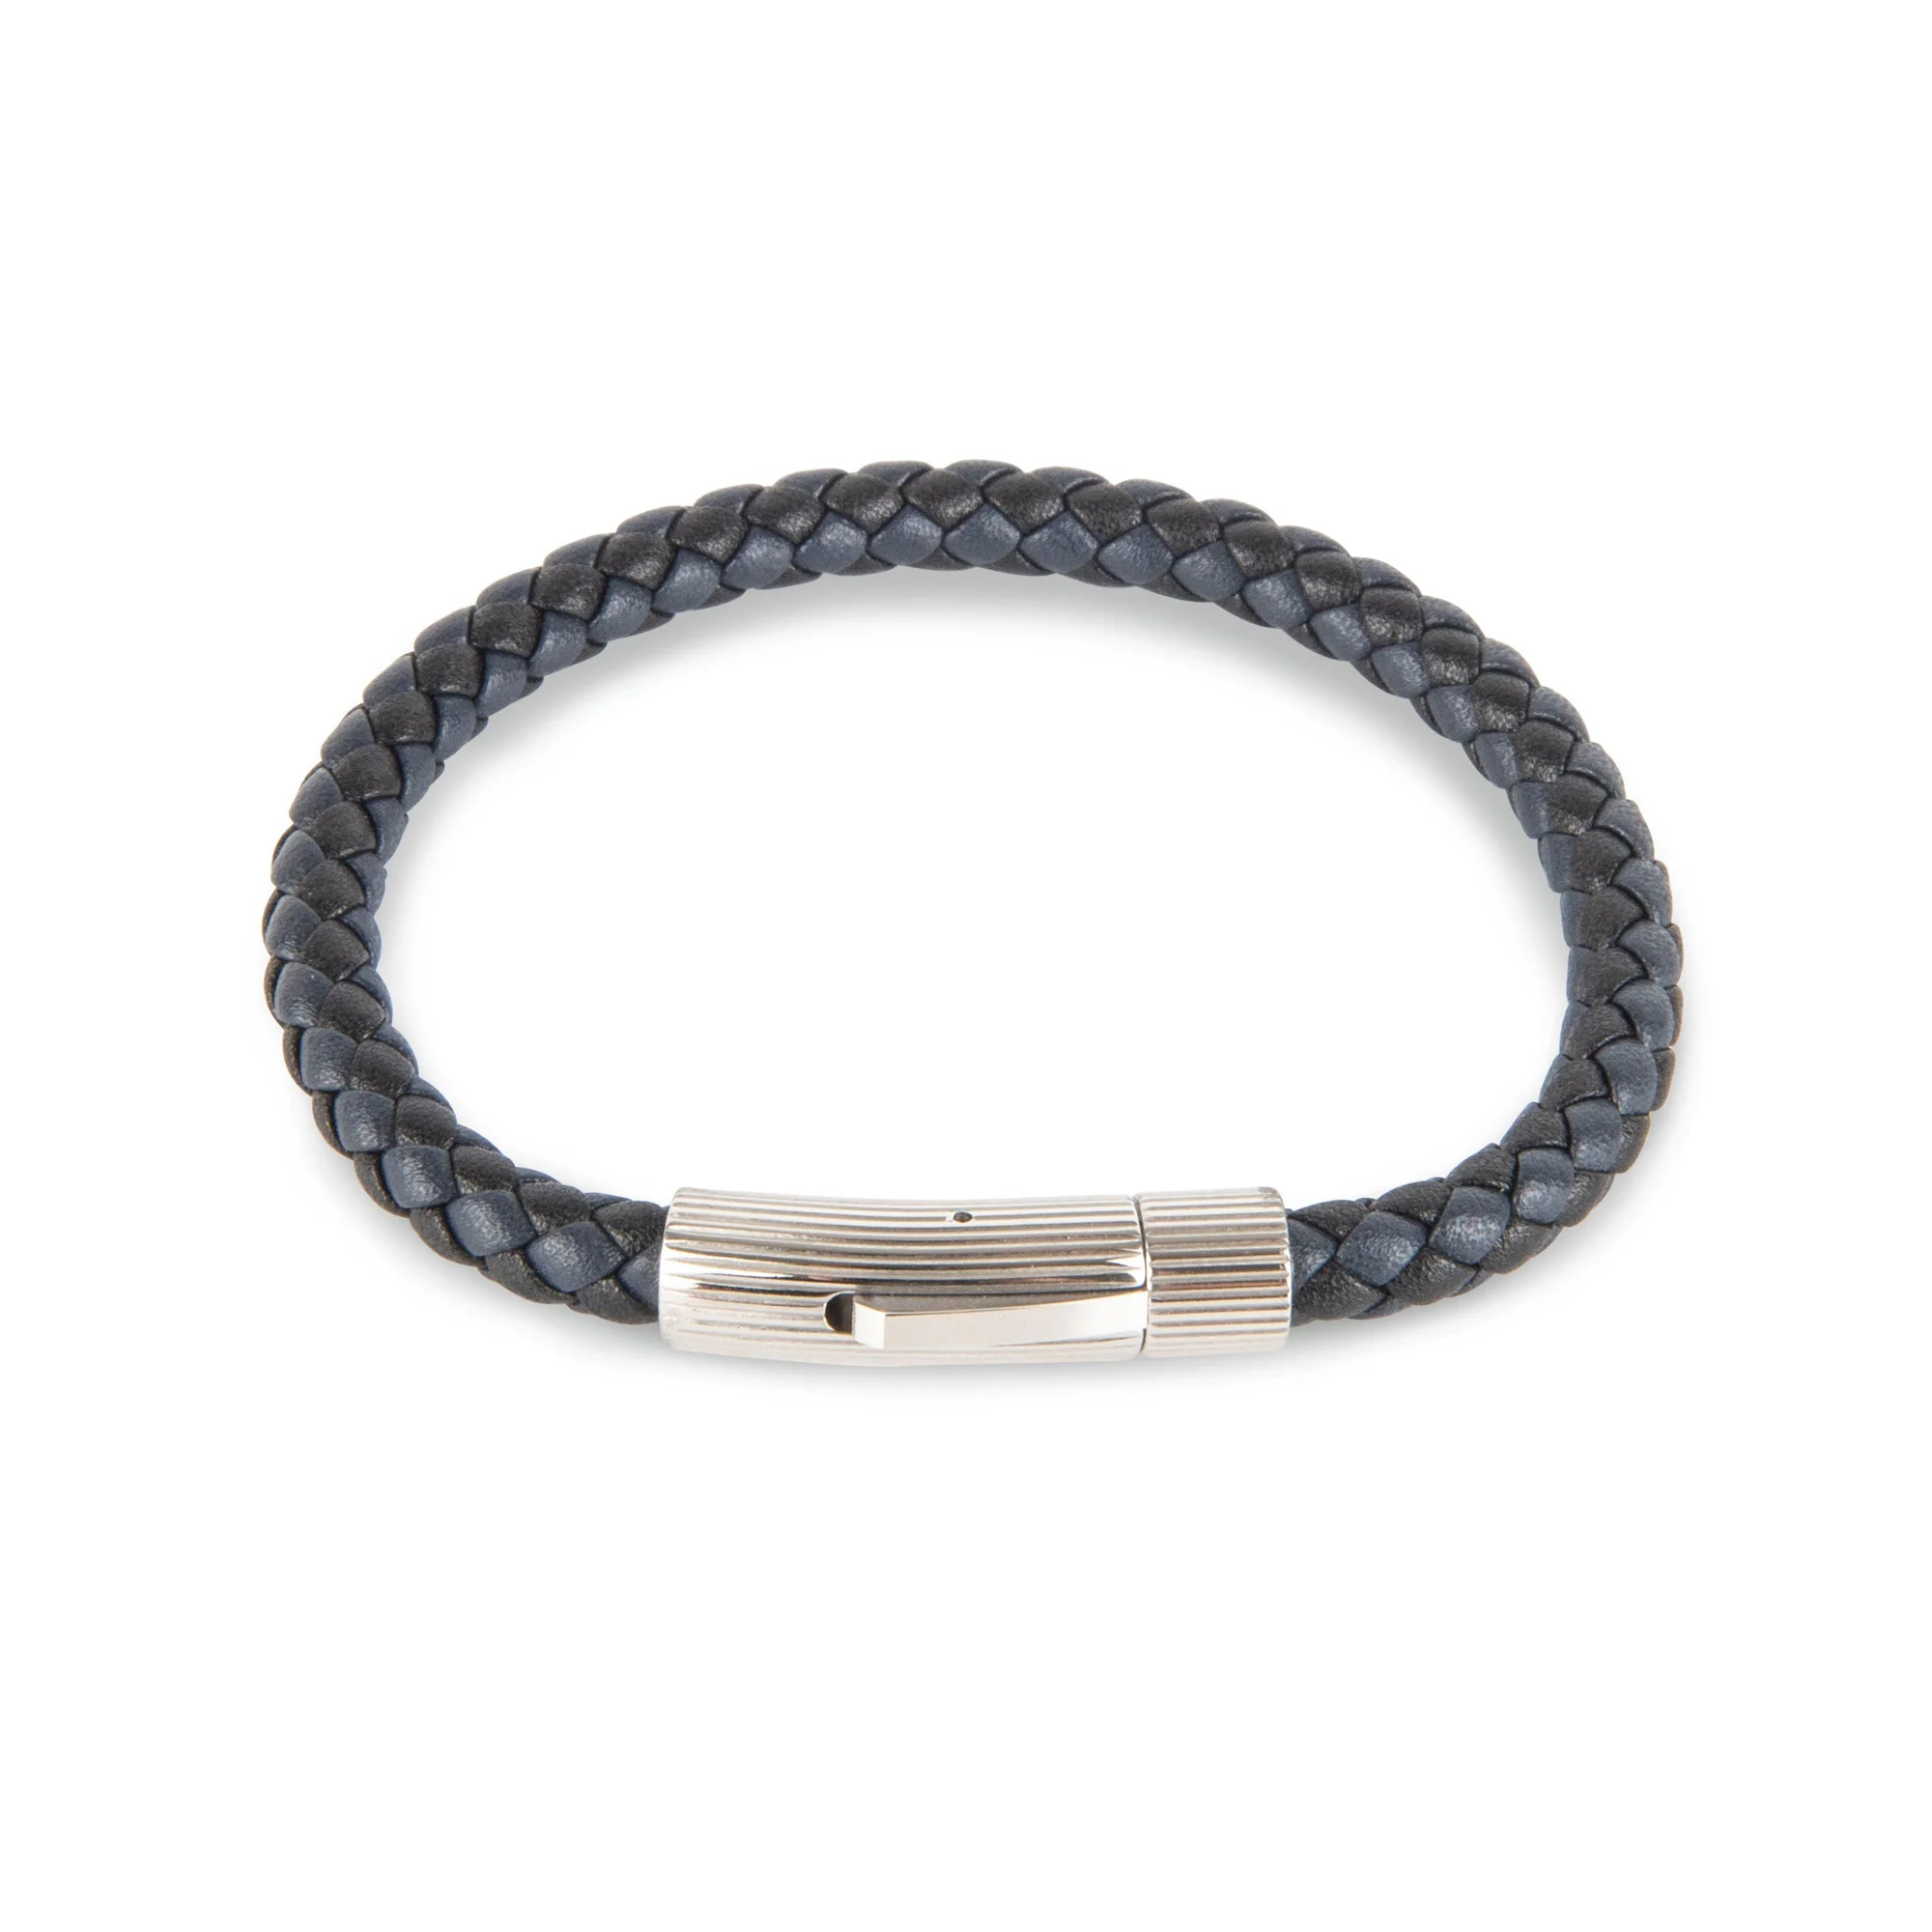 Navy/Black Leather Bracelet with SS Textured Barrel Clasp